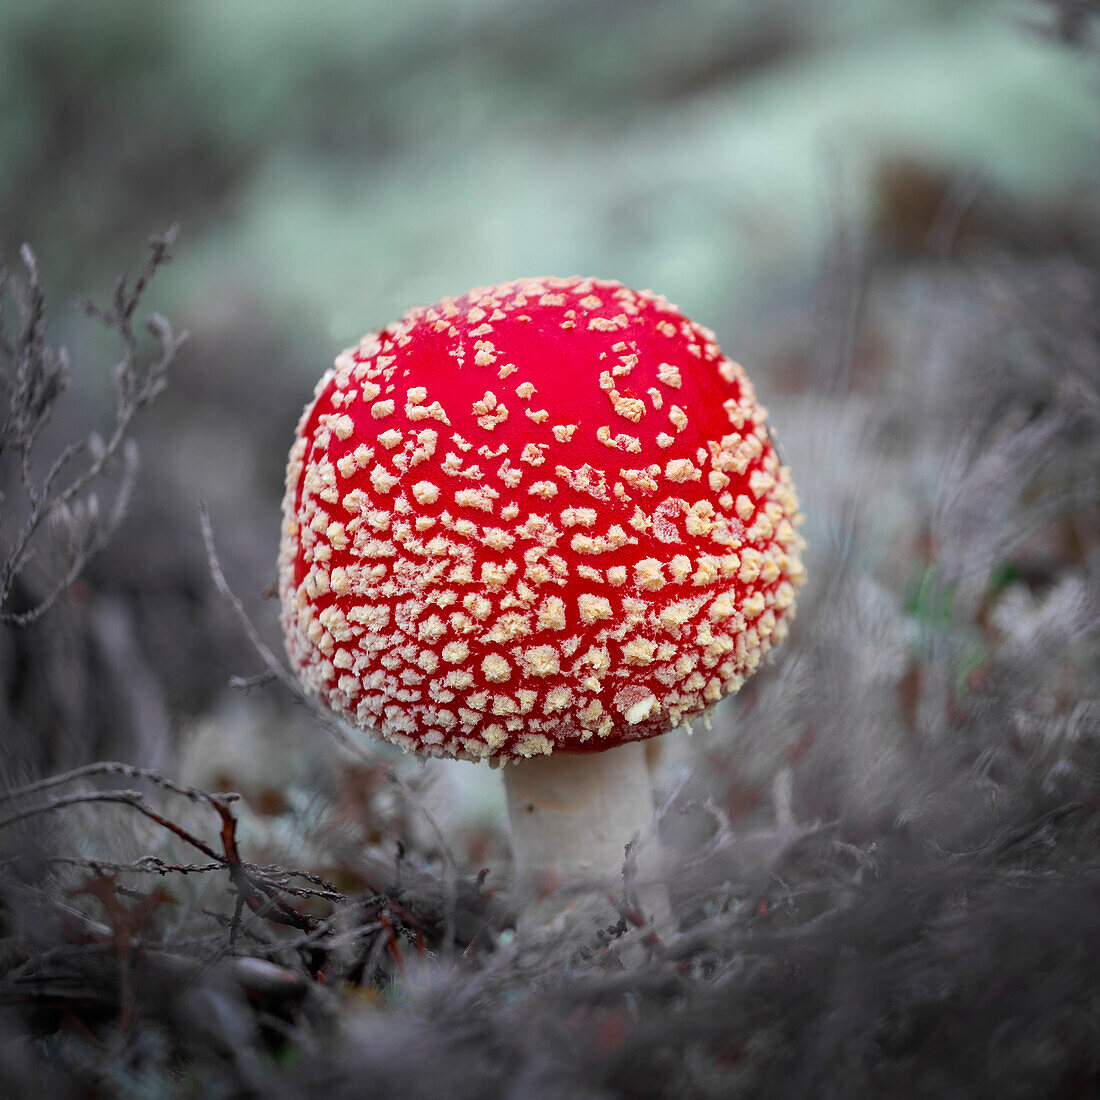 Fly agaric on moss in the nature of Rotsidan in the east of Sweden